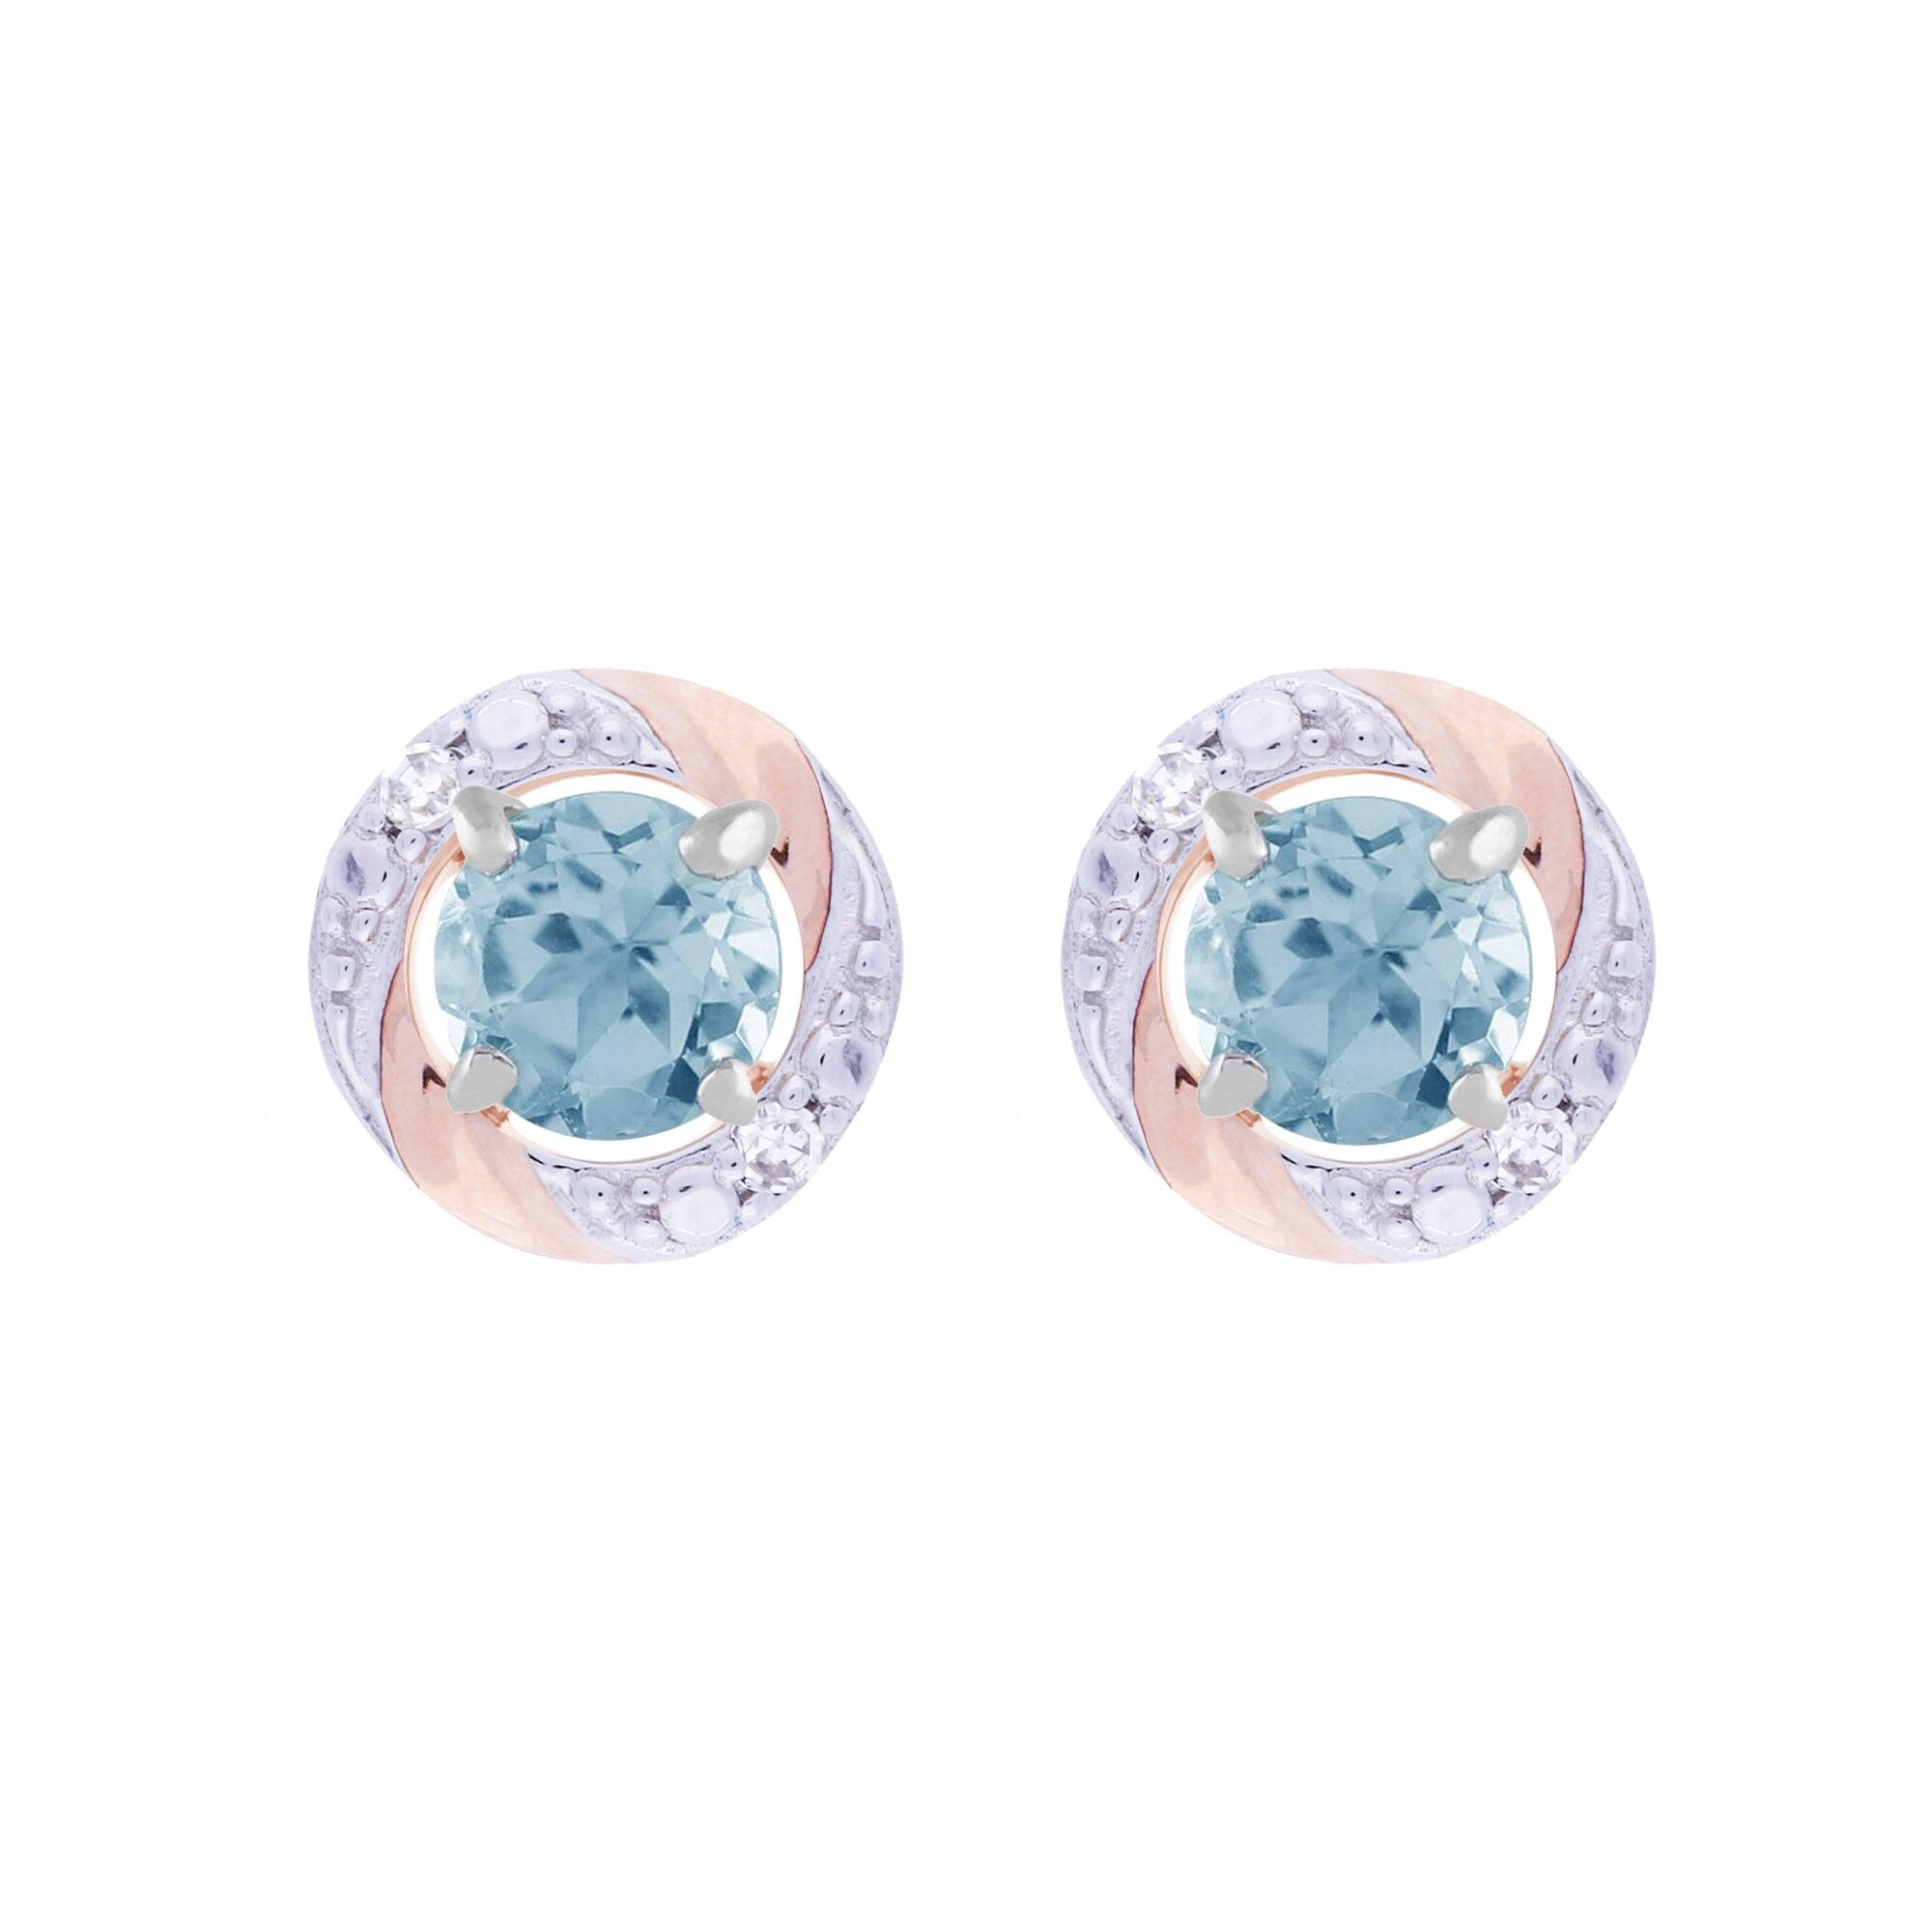 Classic Round Blue Topaz Stud Earrings with Detachable Diamond Round Earrings Jacket Set in 9ct White Gold